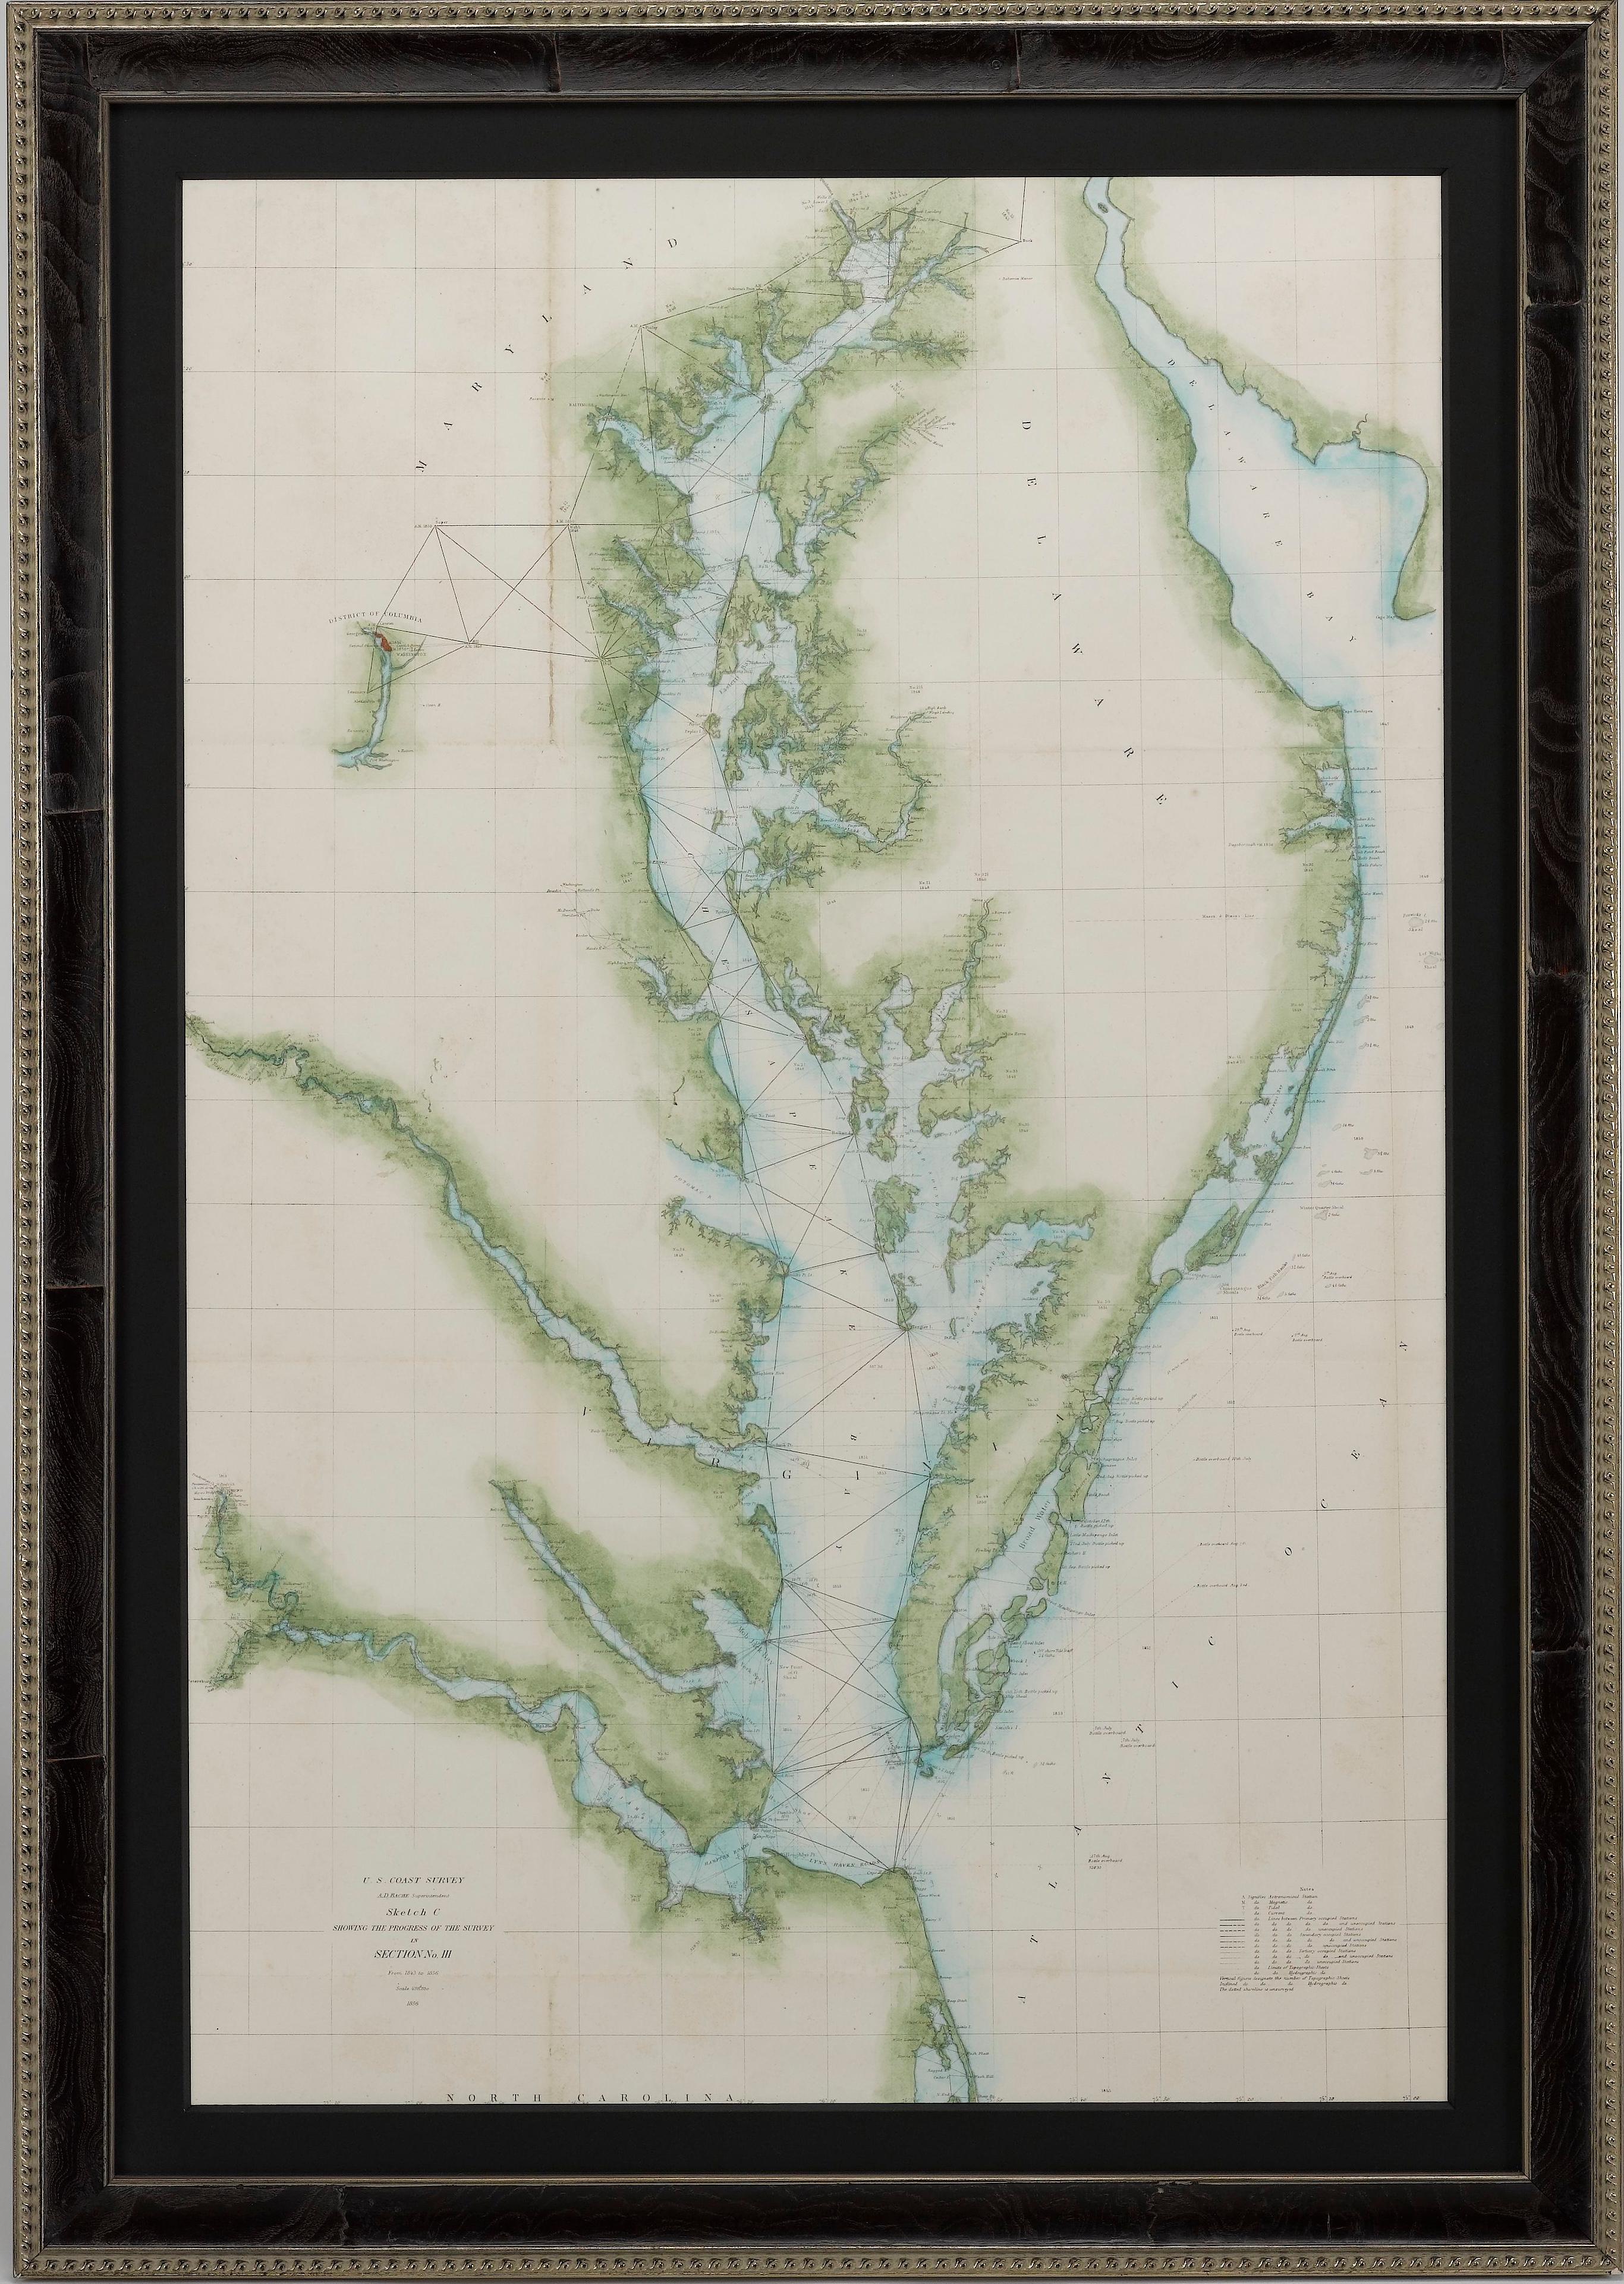 Presented is U.S. Coast Survey nautical chart or maritime map of Chesapeake Bay and Delaware Bay from 1856. The map depicts the region from Susquehanna, Maryland to the northern Outer Banks in North Carolina. It also shows from Richmond and